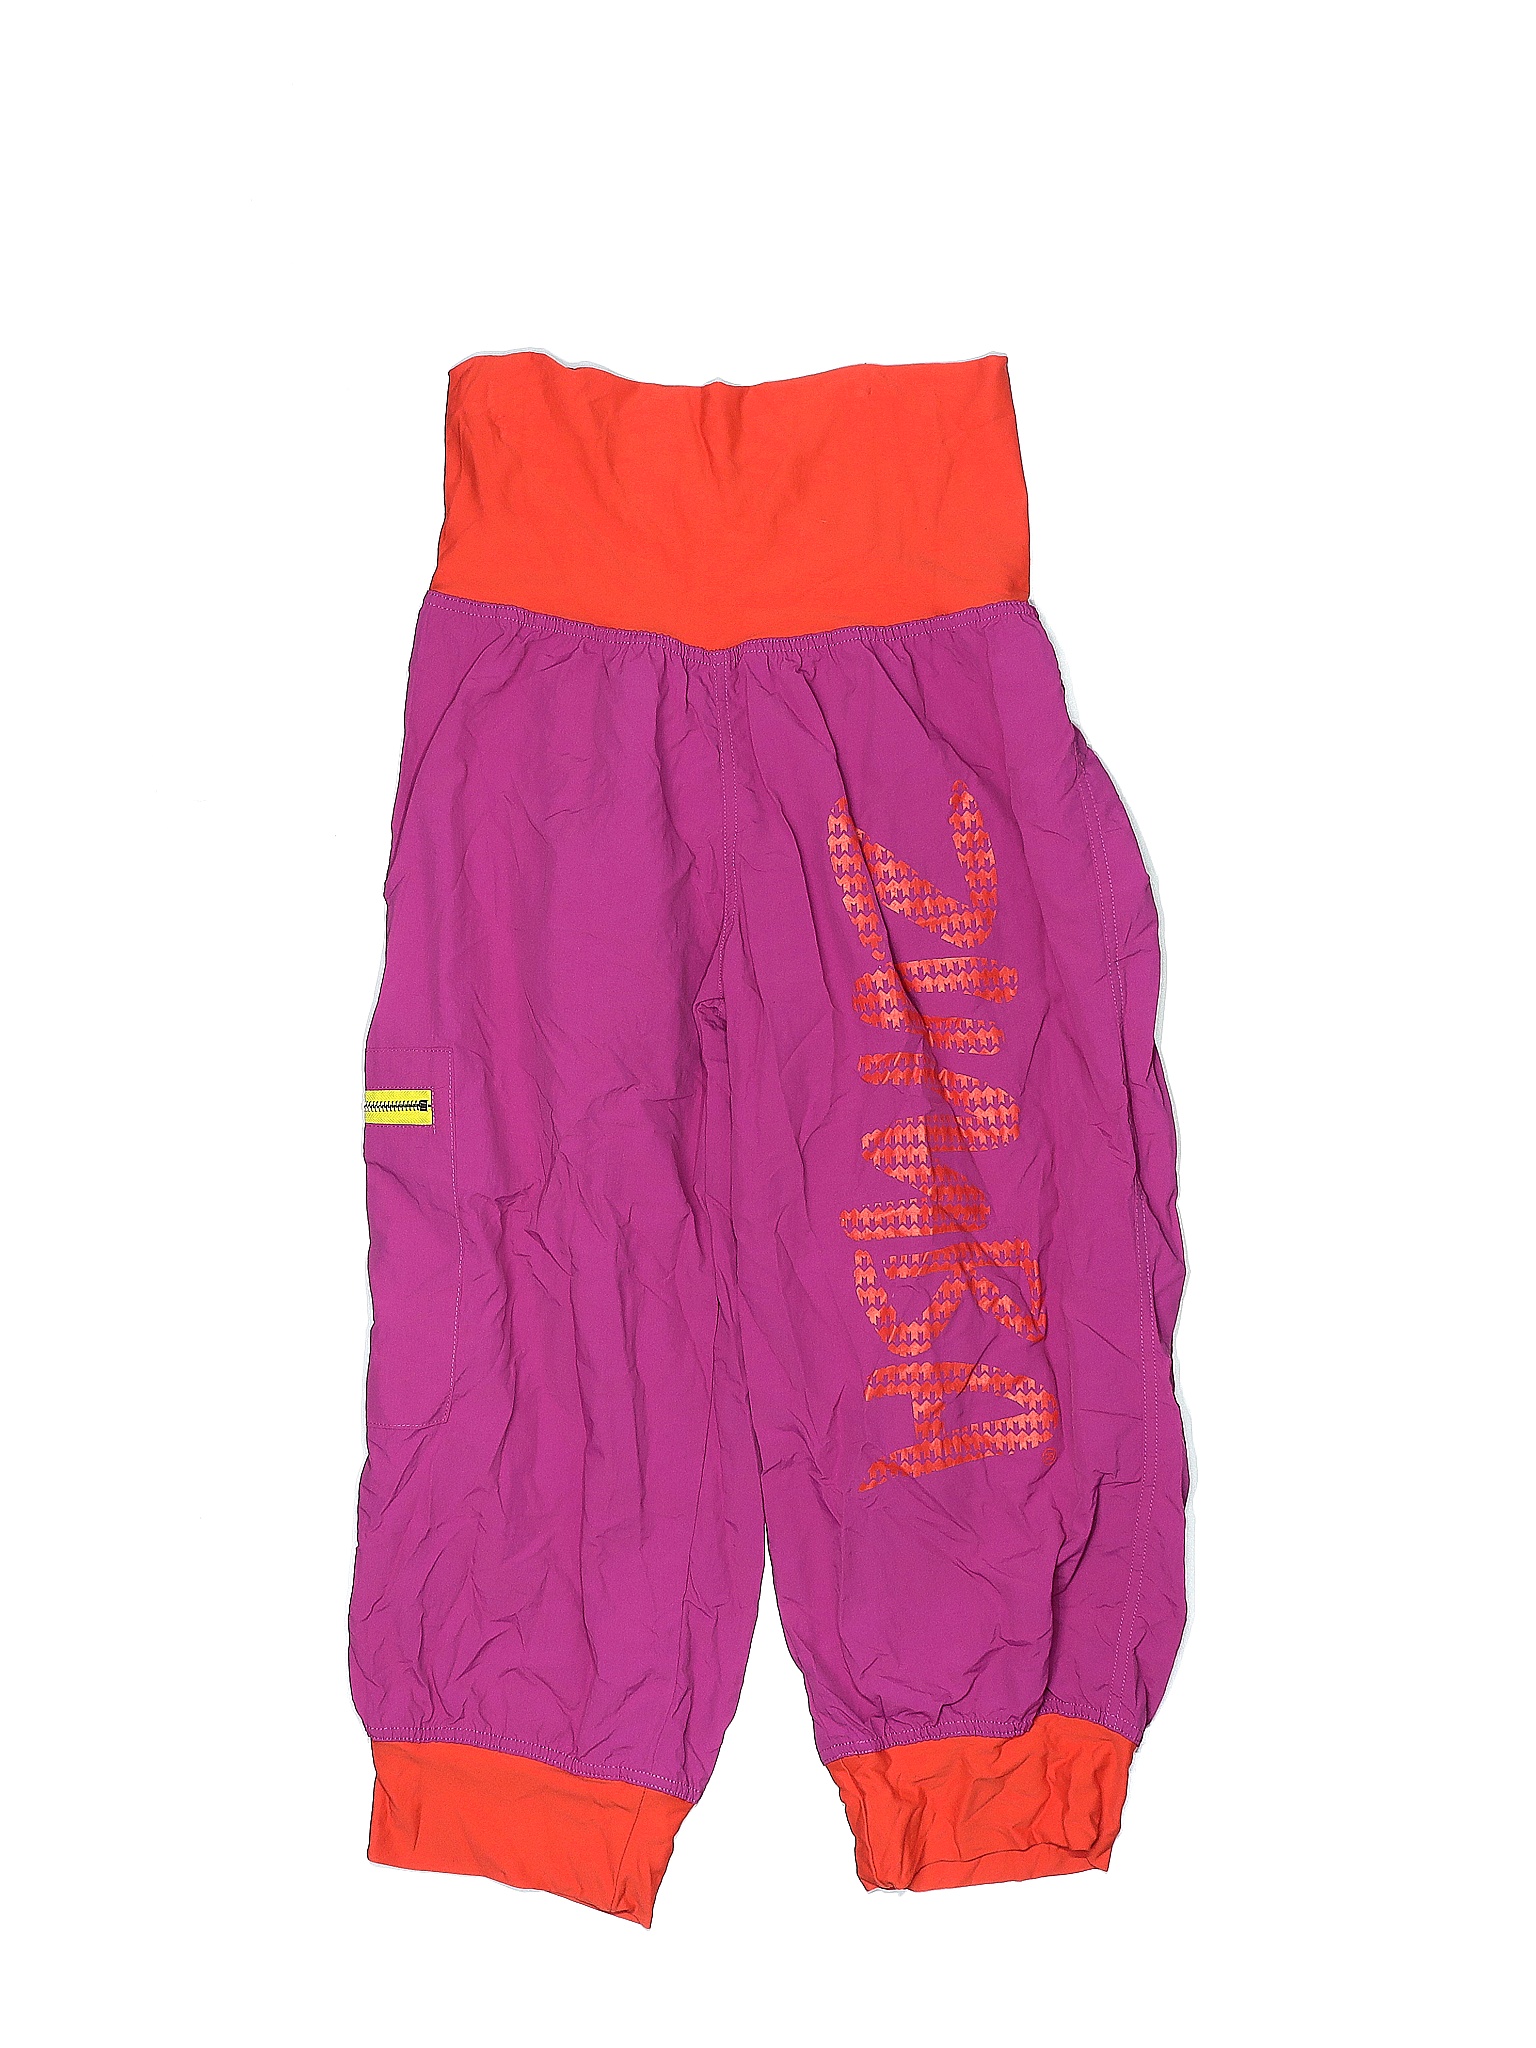 Zumba Wear 100% Nylon Solid Colored Orange Casual Pants Size X-Large (Kids)  - 79% off